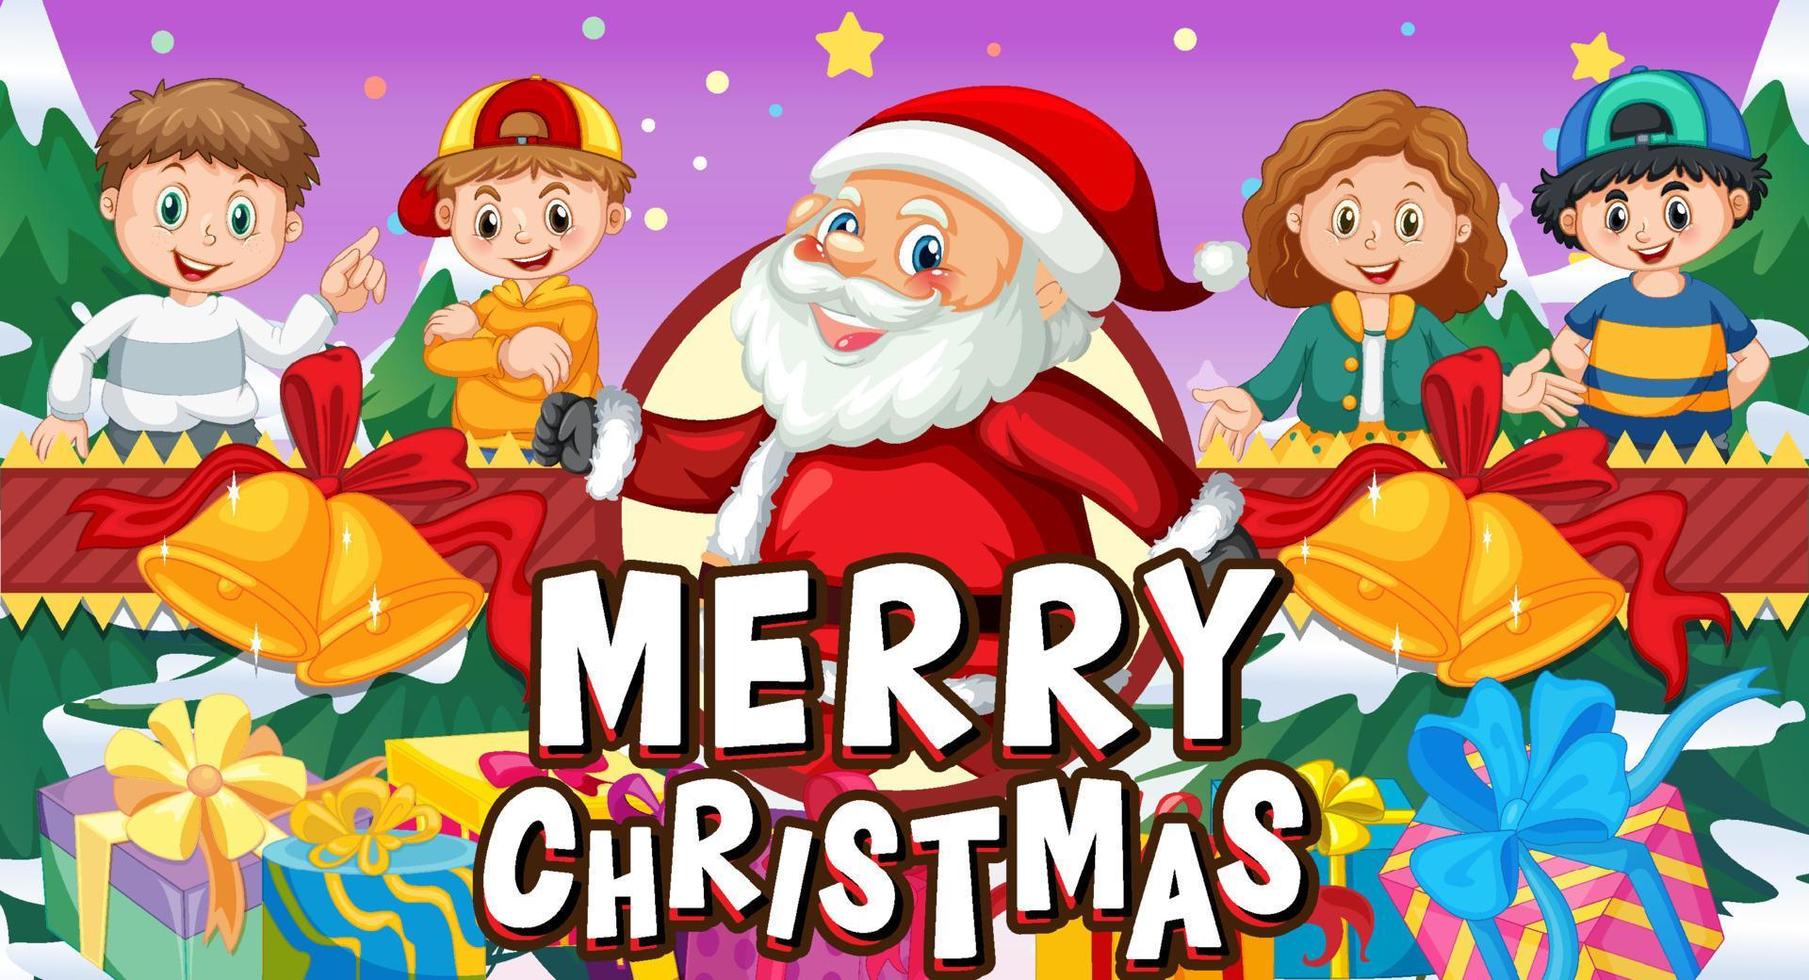 Merry Christmas banner design with Santa Claus cartoon character vector